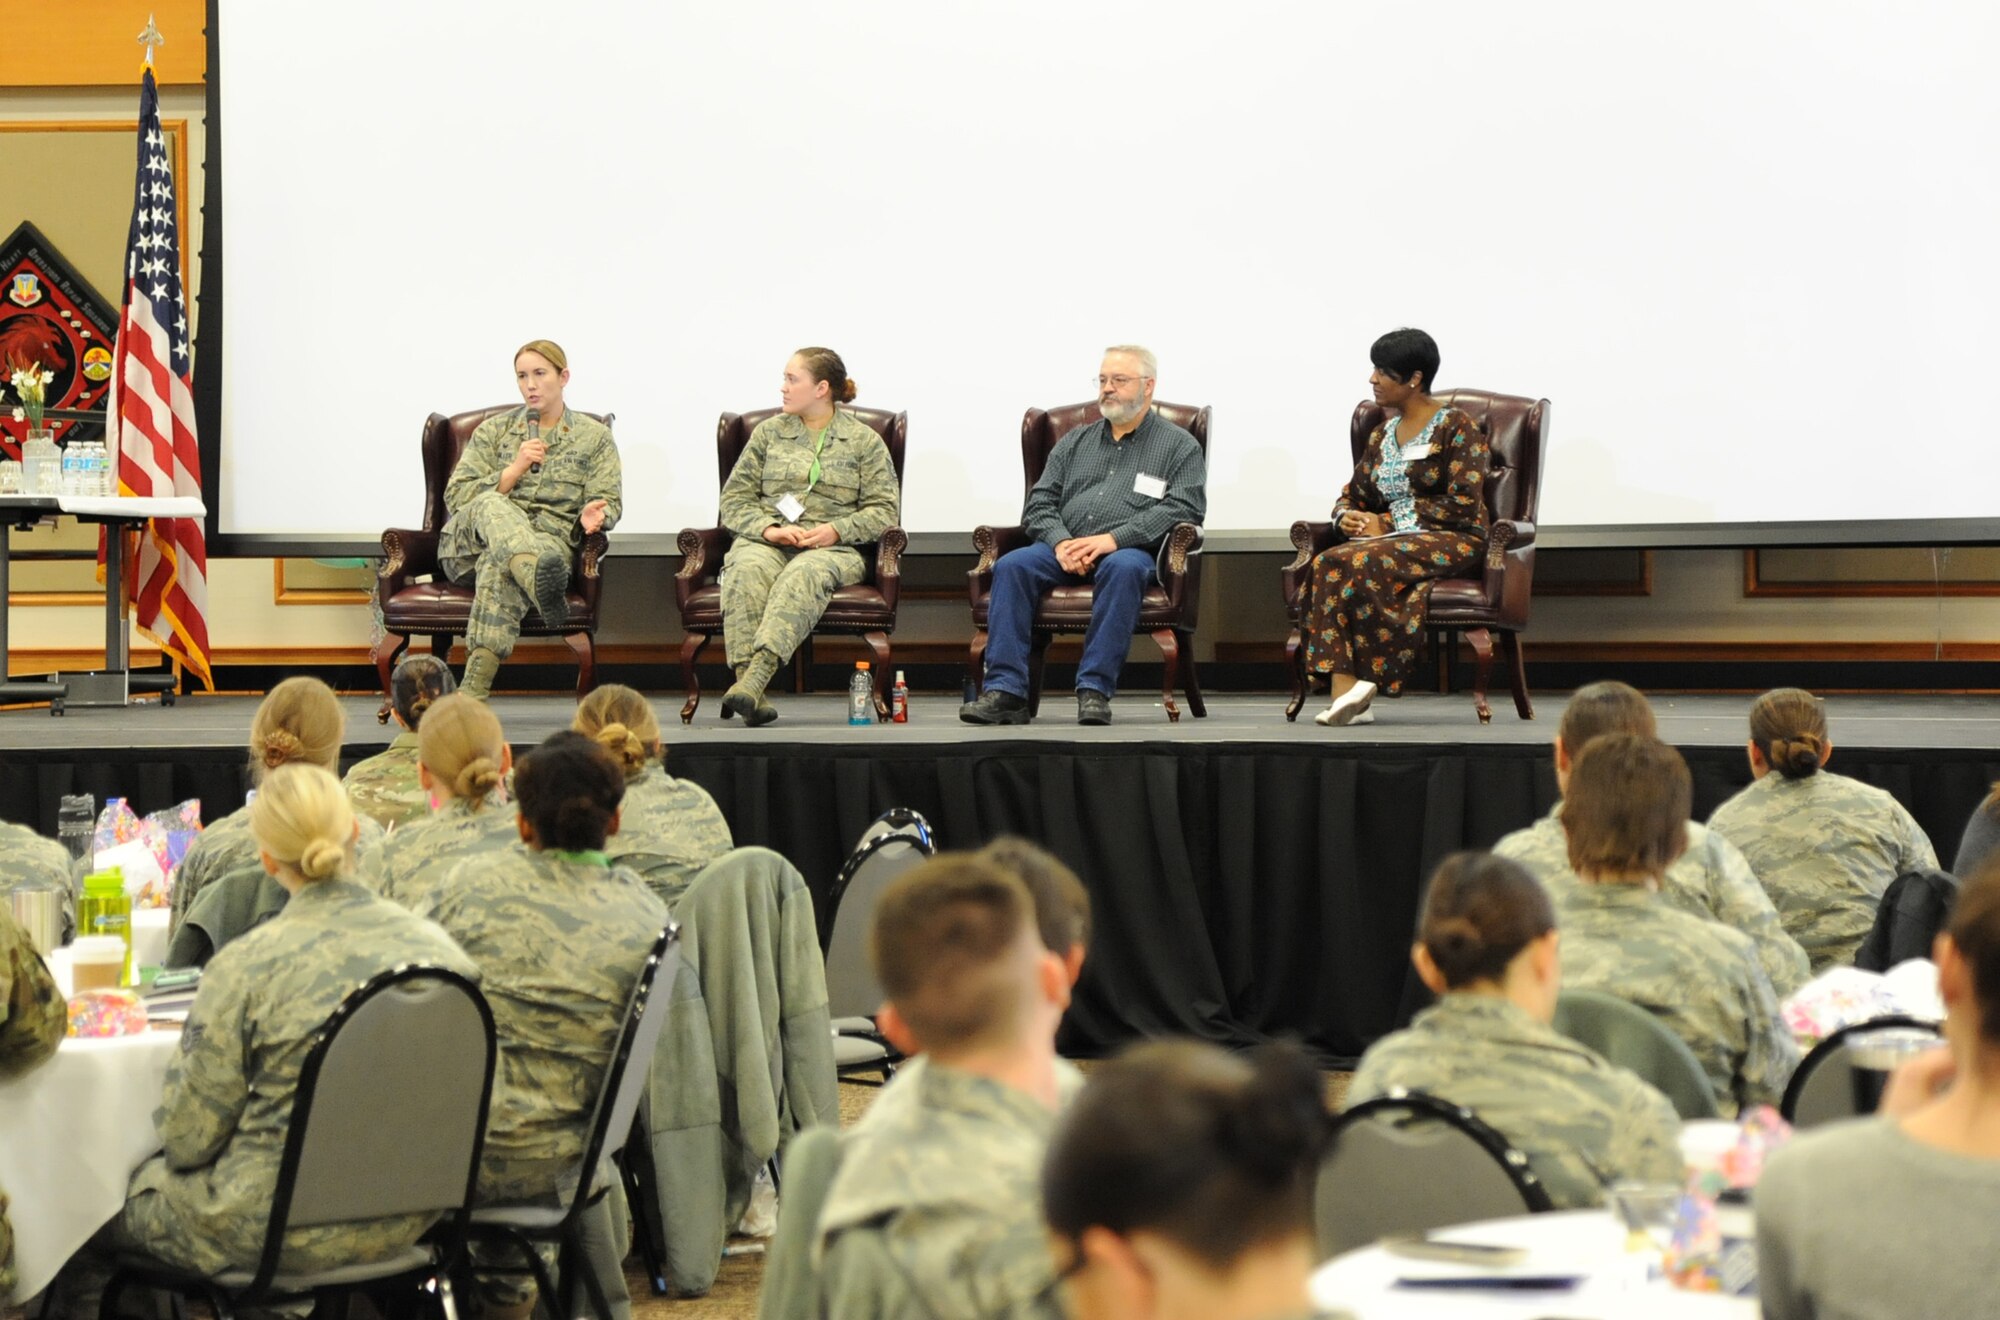 Maj. Samantha Miller, left, 341st Force Support Squadron commander, talks about working in a diverse environment during a women’s symposium panel discussion March 20, 2018, at Malmstrom Air Force Base, Mont. The two-day event included numerous guest speakers who discussed topics ranging from diversity and mentorship to money management and balancing military life with personal life. (U.S. Air Force photo by Christy Mason)